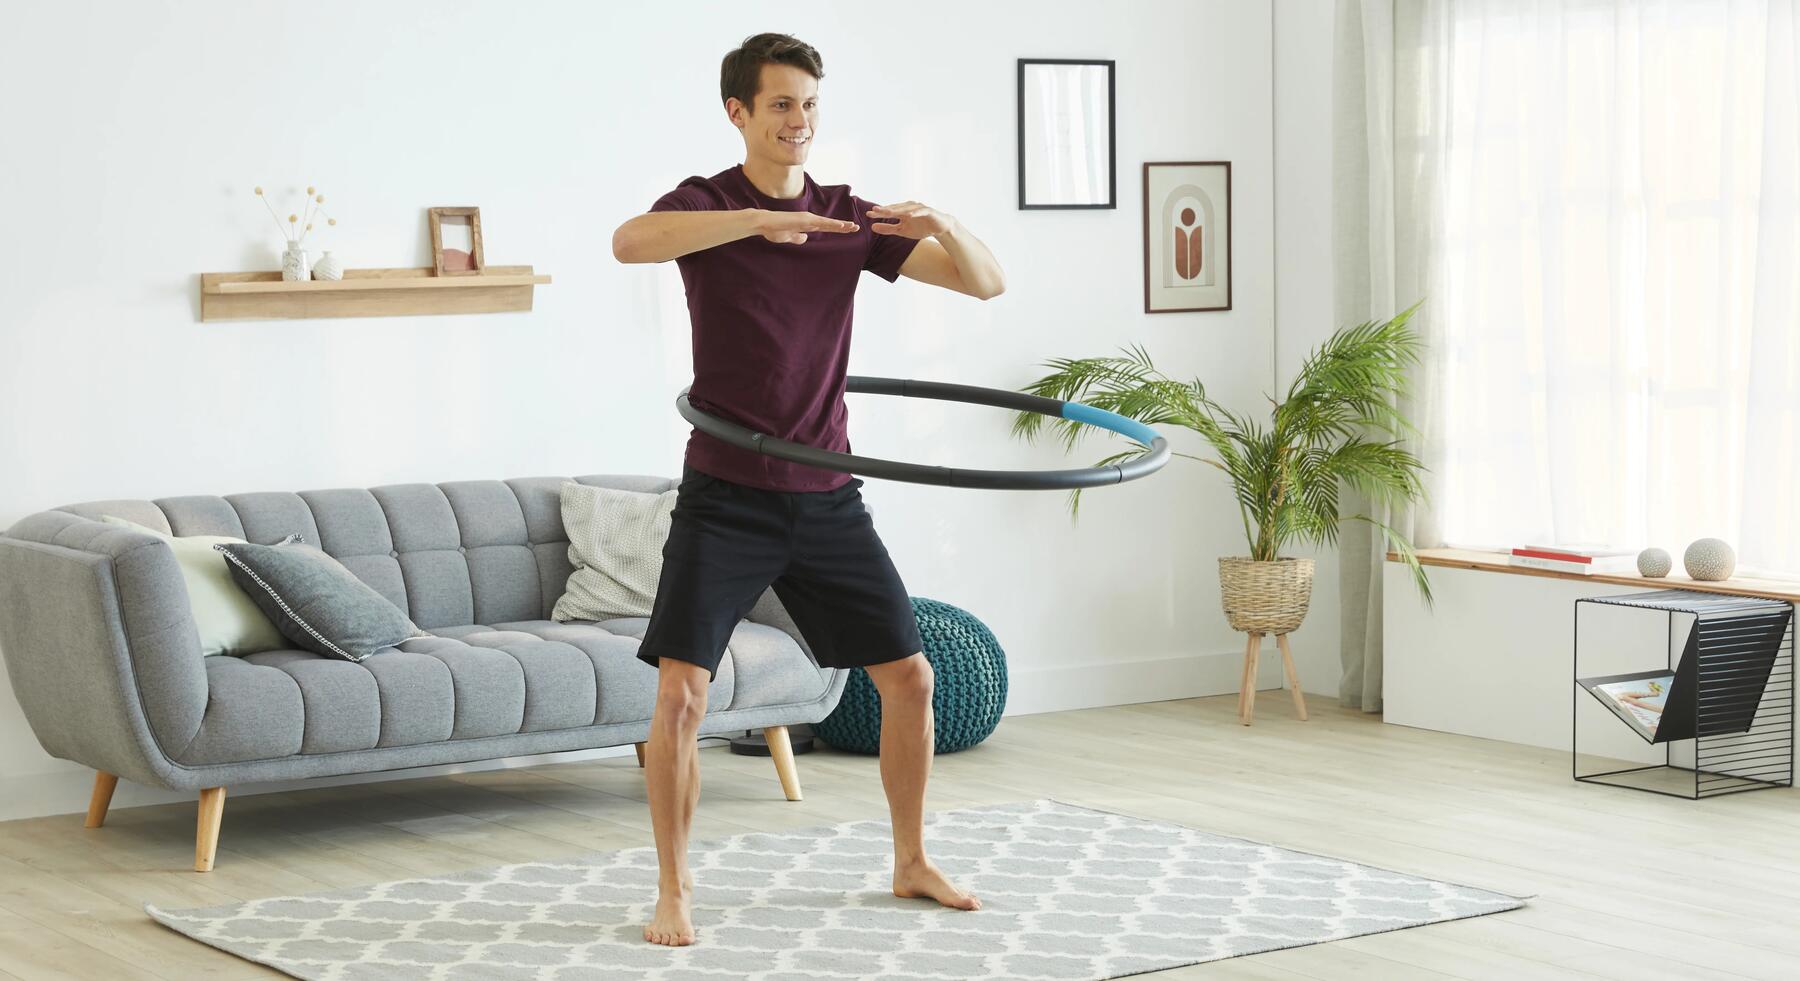 A man using a weighted hoop in his living room